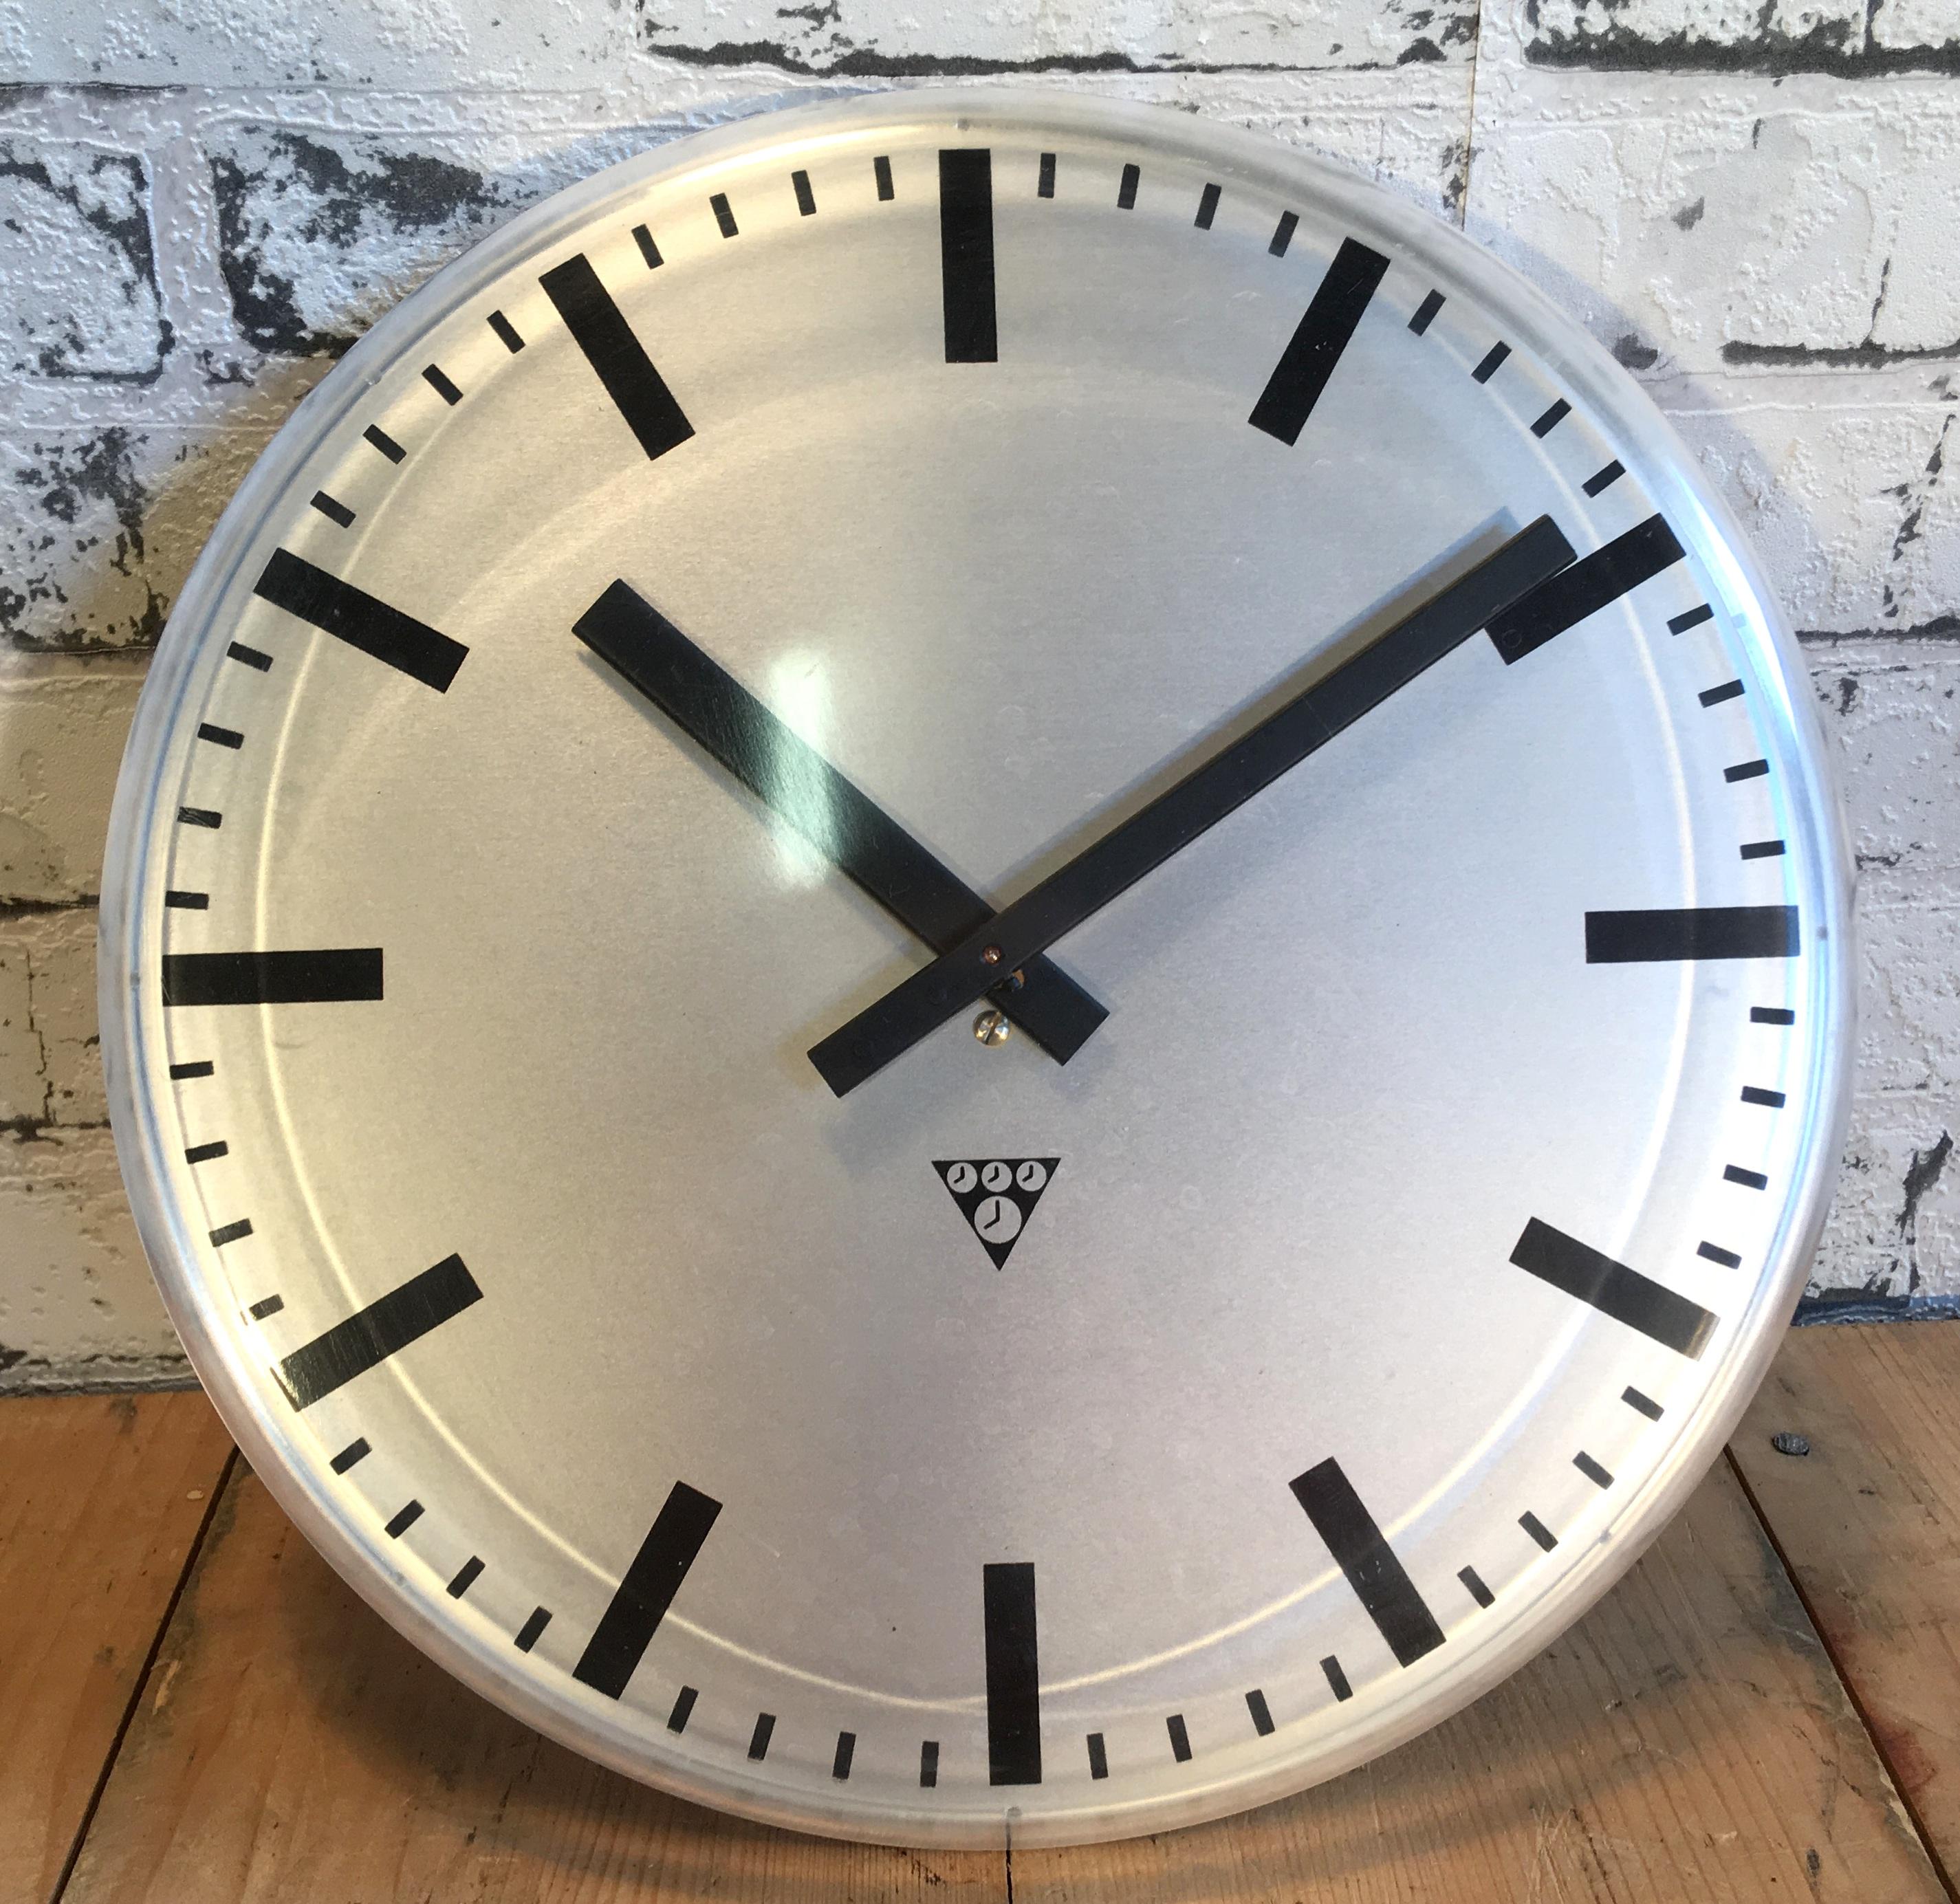 This wall clock was produced by Pragotron in former Czechoslovakia during the 1980s. It features a grey aluminium dial and a curved plastic clear glass cover. The piece has been converted into a battery-powered clockwork and requires only one